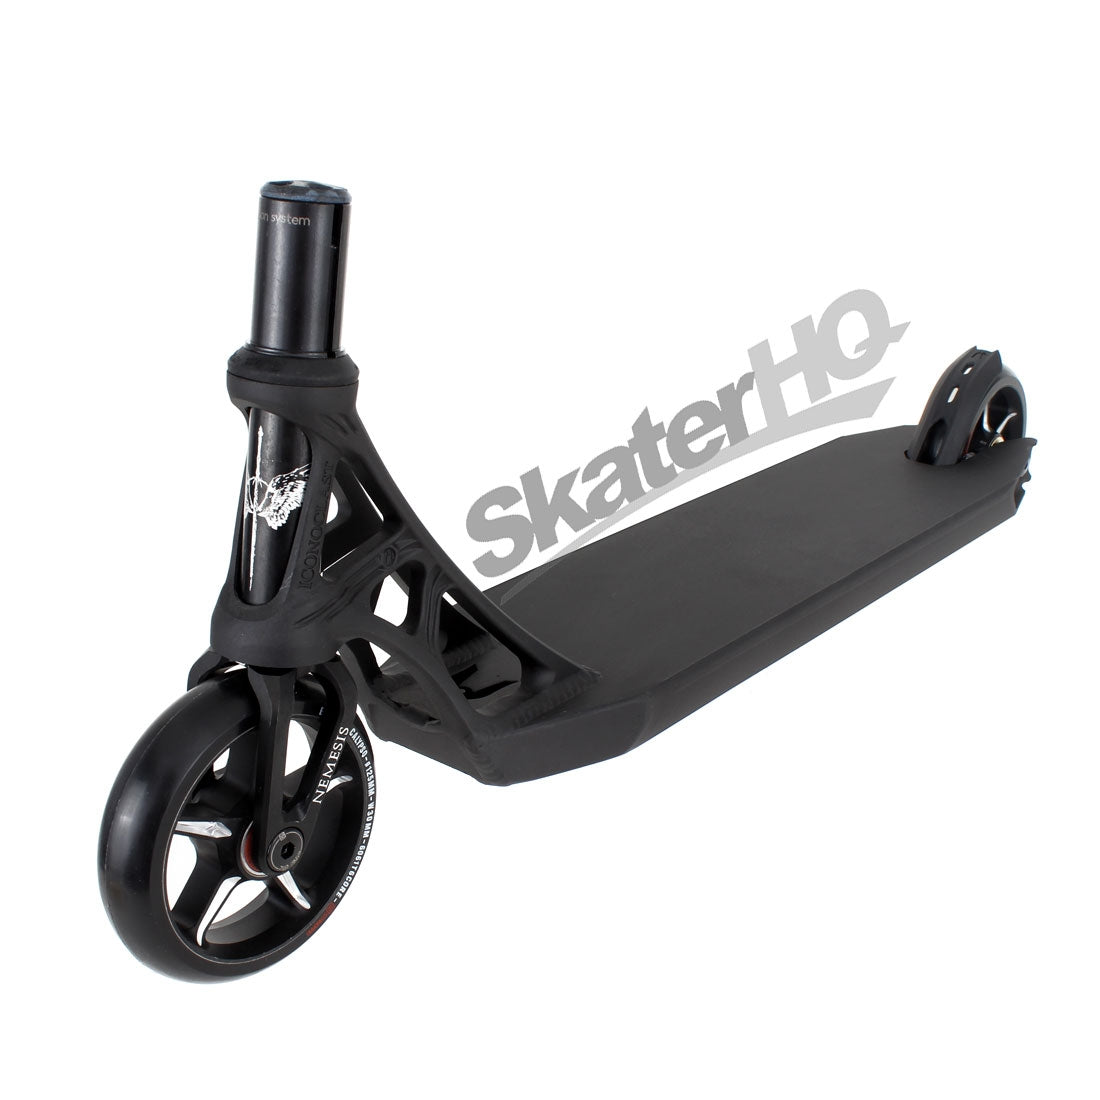 Ethic 12 Standard Scooter Pack - Black Scooter Hardware and Parts